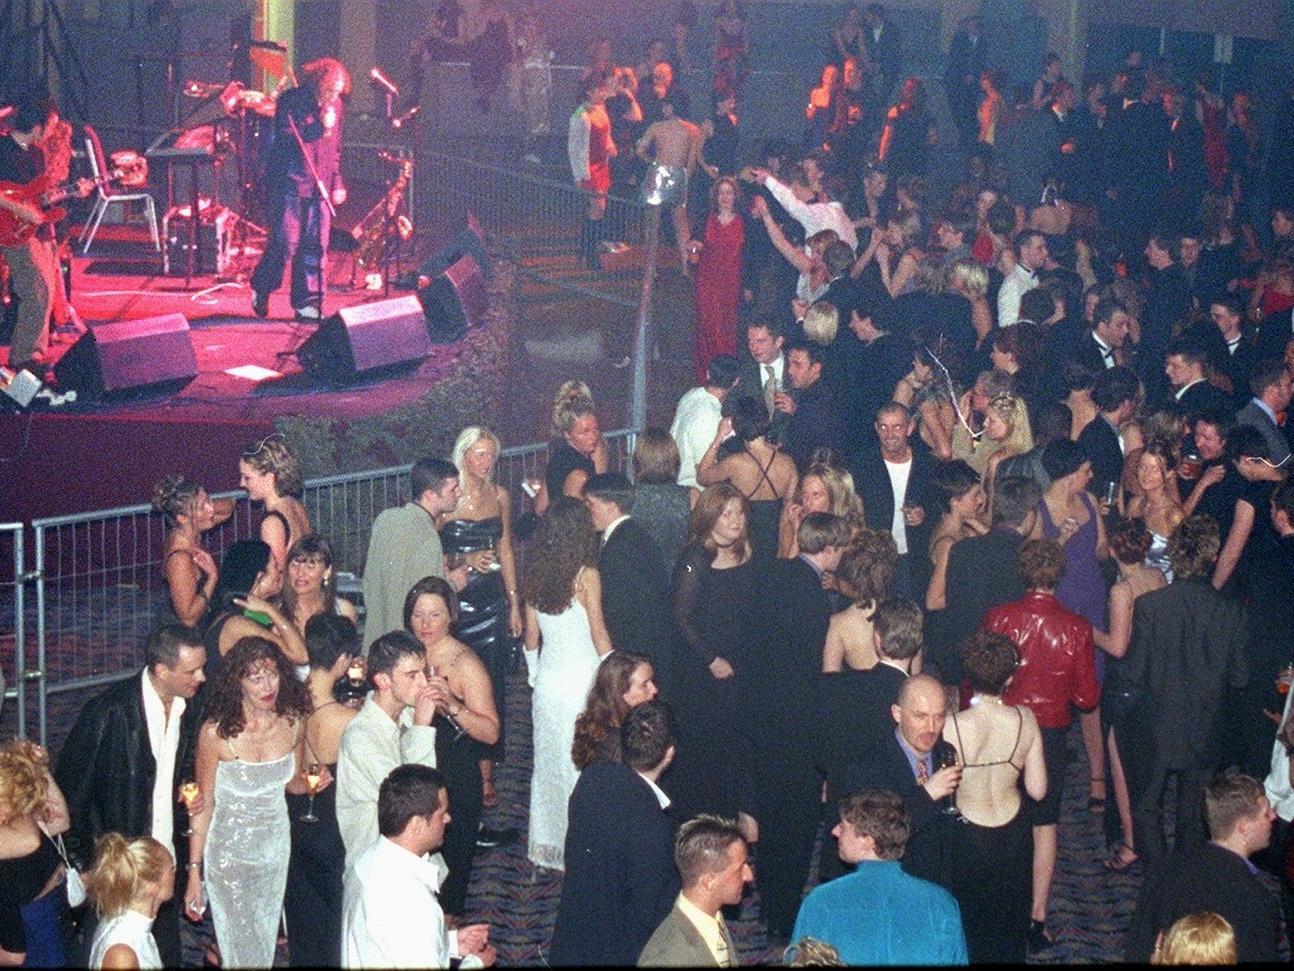 Dancing to the bands at the Millennium Ball, Winter Gardens